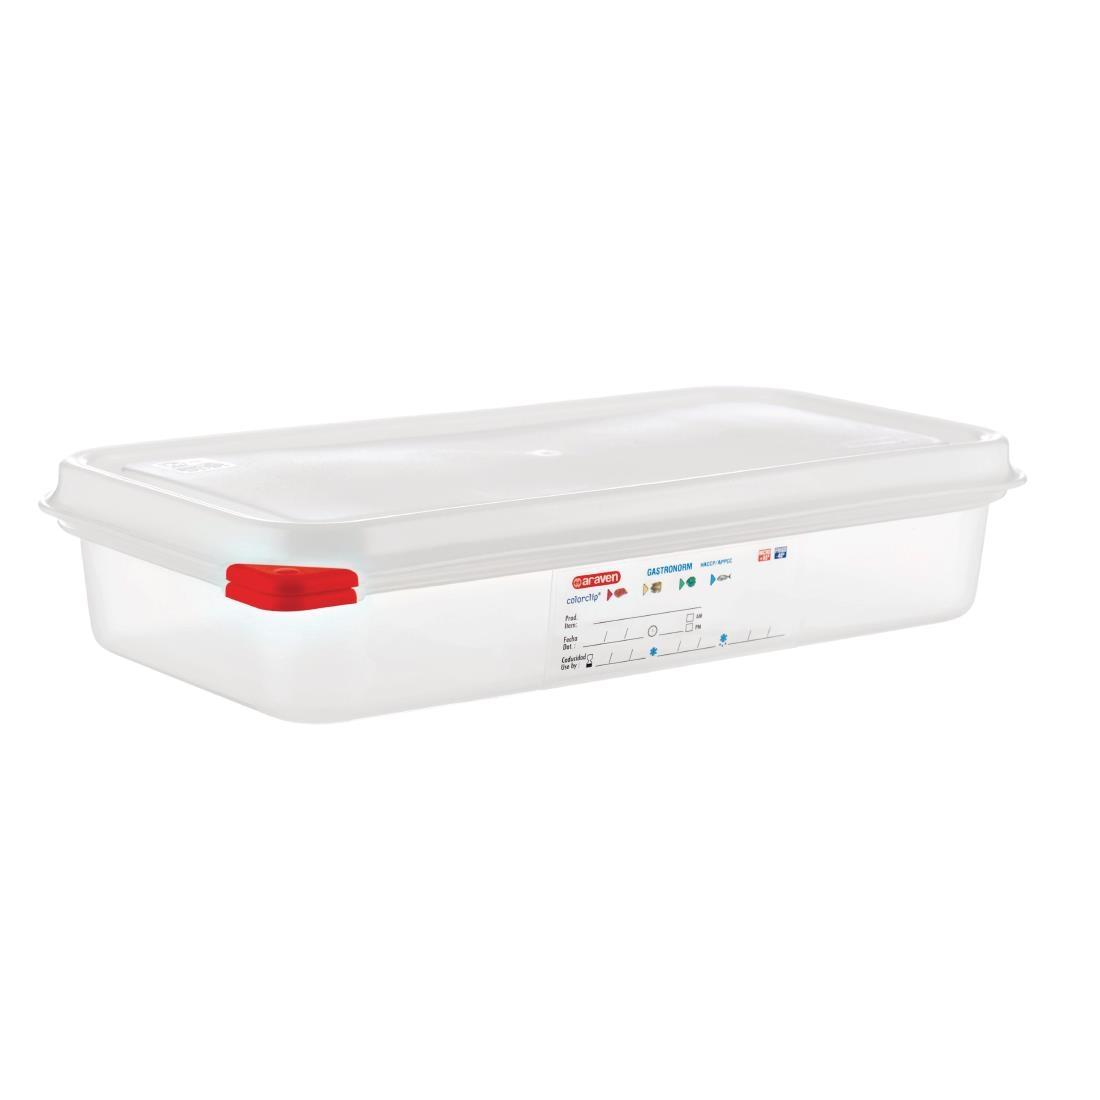 Araven Polypropylene 1/3 Gastronorm Food Containers 2.5Ltr (Pack of 4) - GL262  - 1